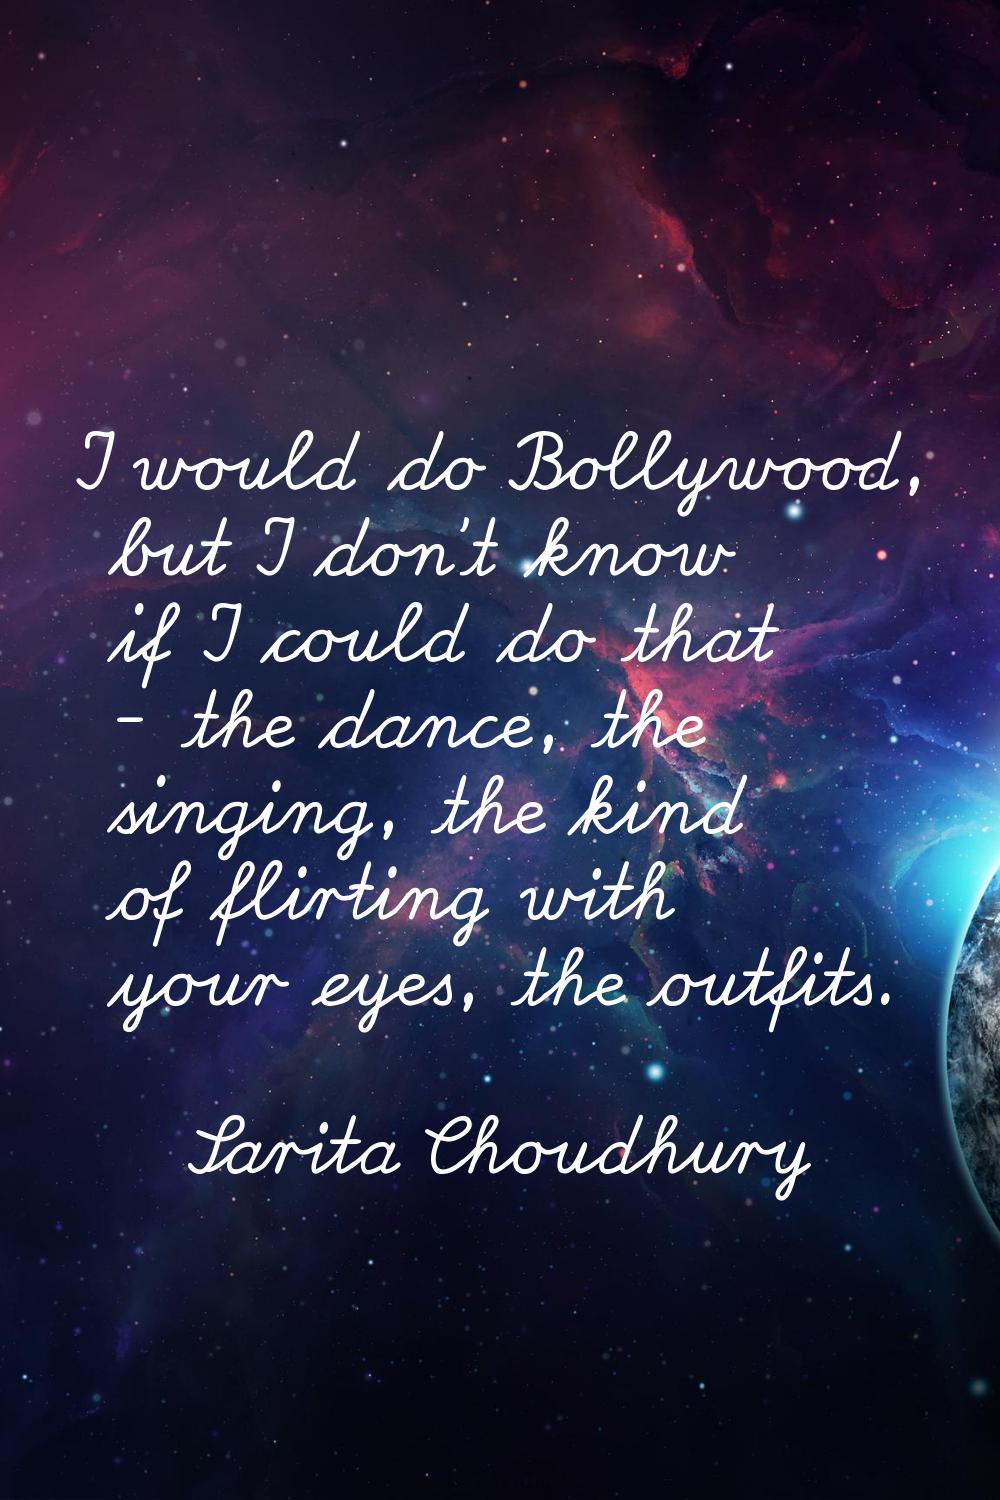 I would do Bollywood, but I don't know if I could do that - the dance, the singing, the kind of fli